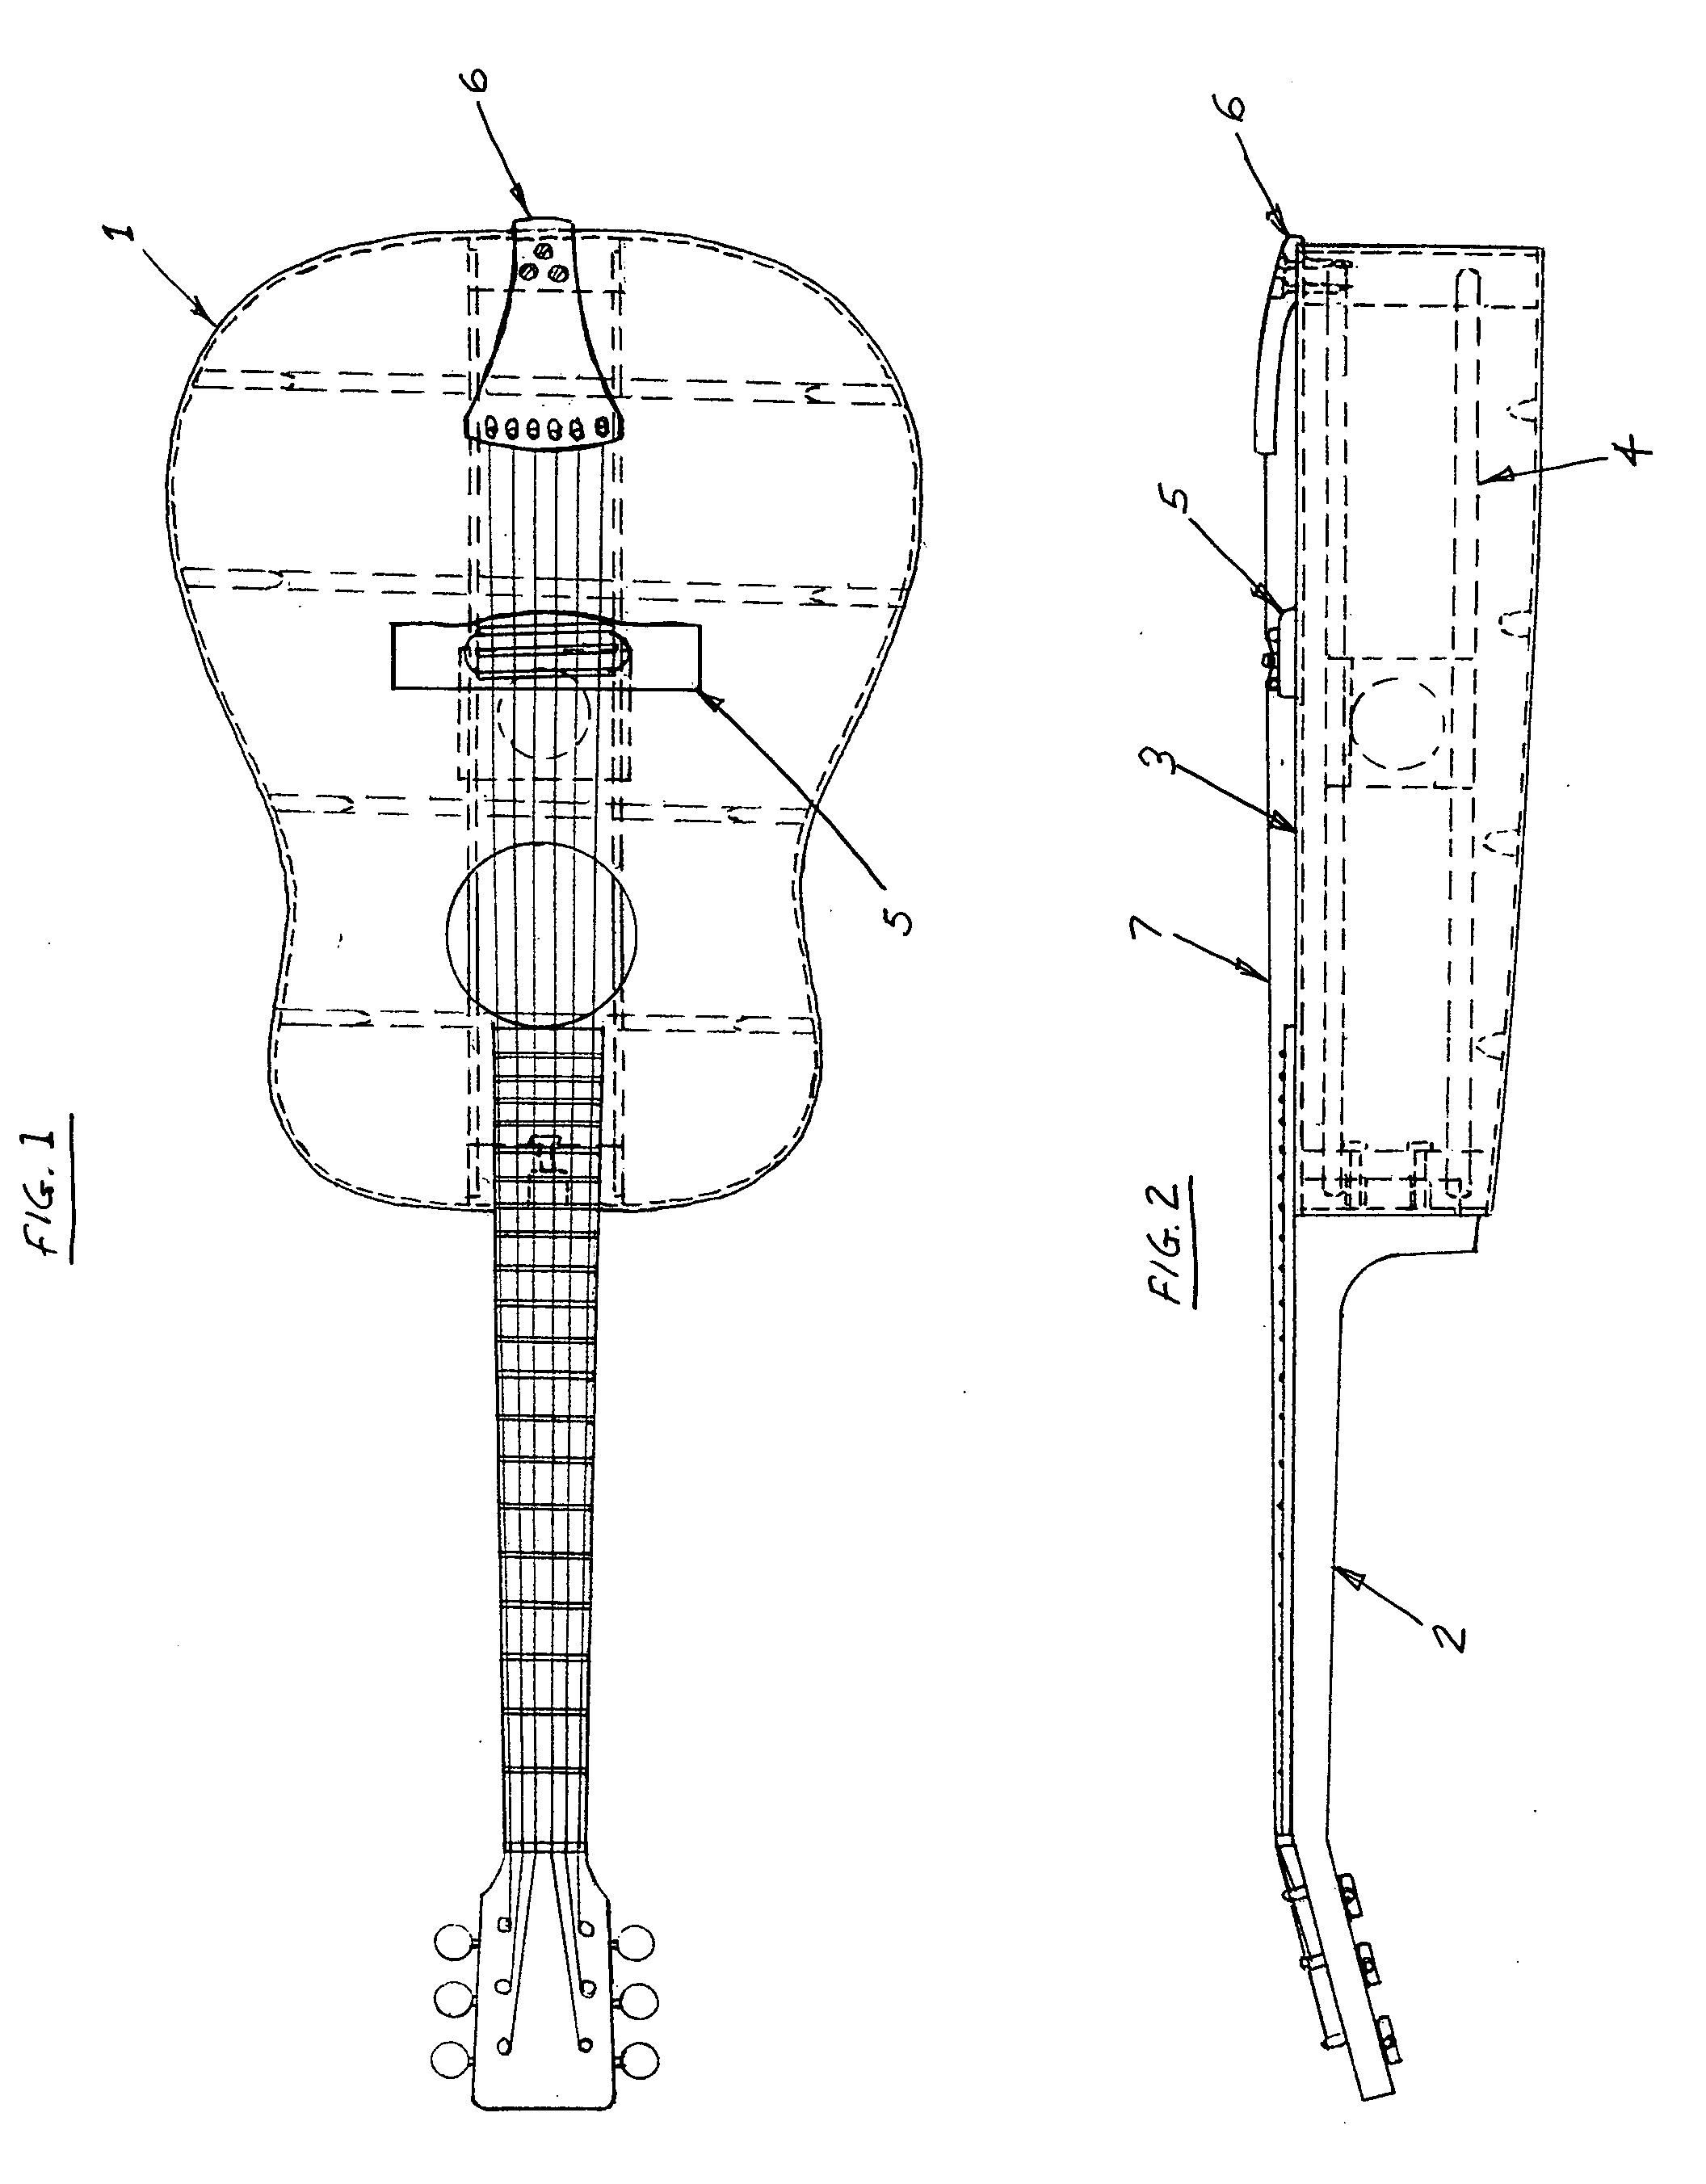 Bracing and bridge system for stringed instruments